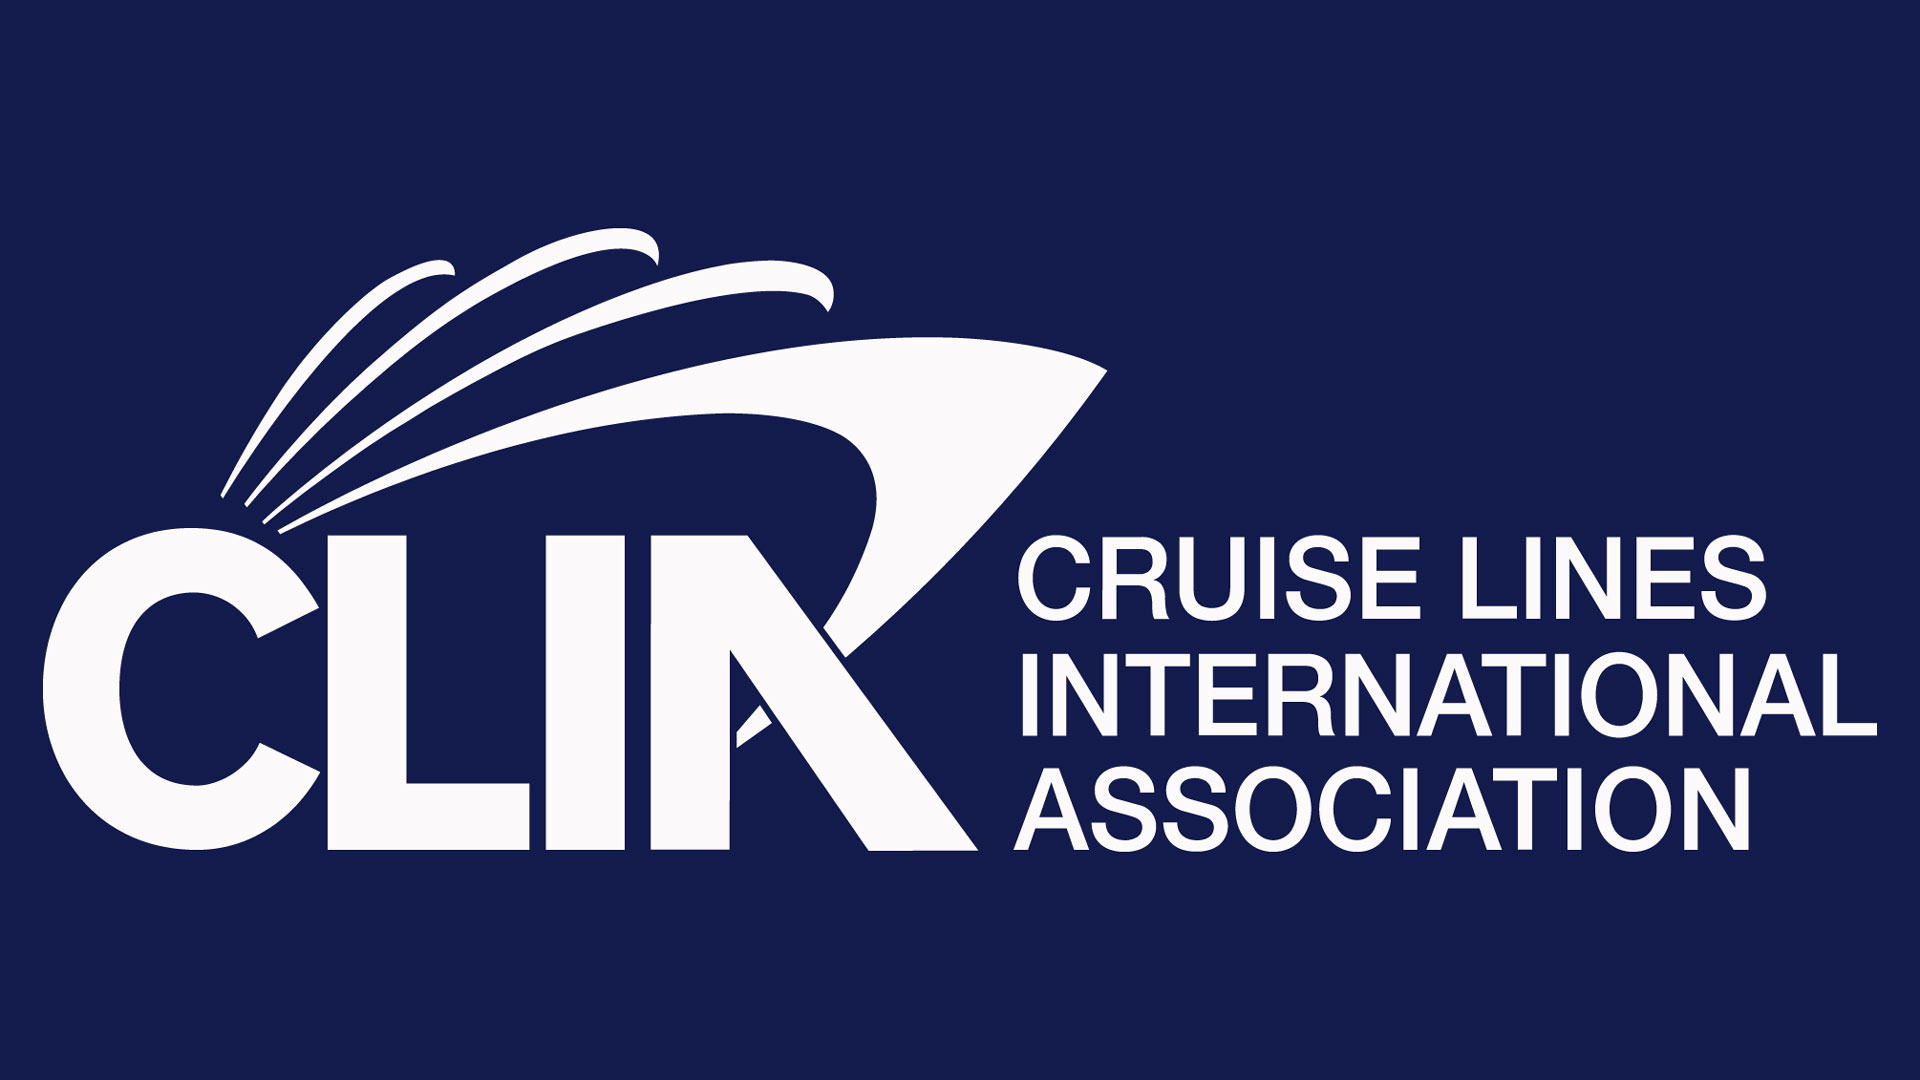 cruise lines international association (clia) is the world's largest